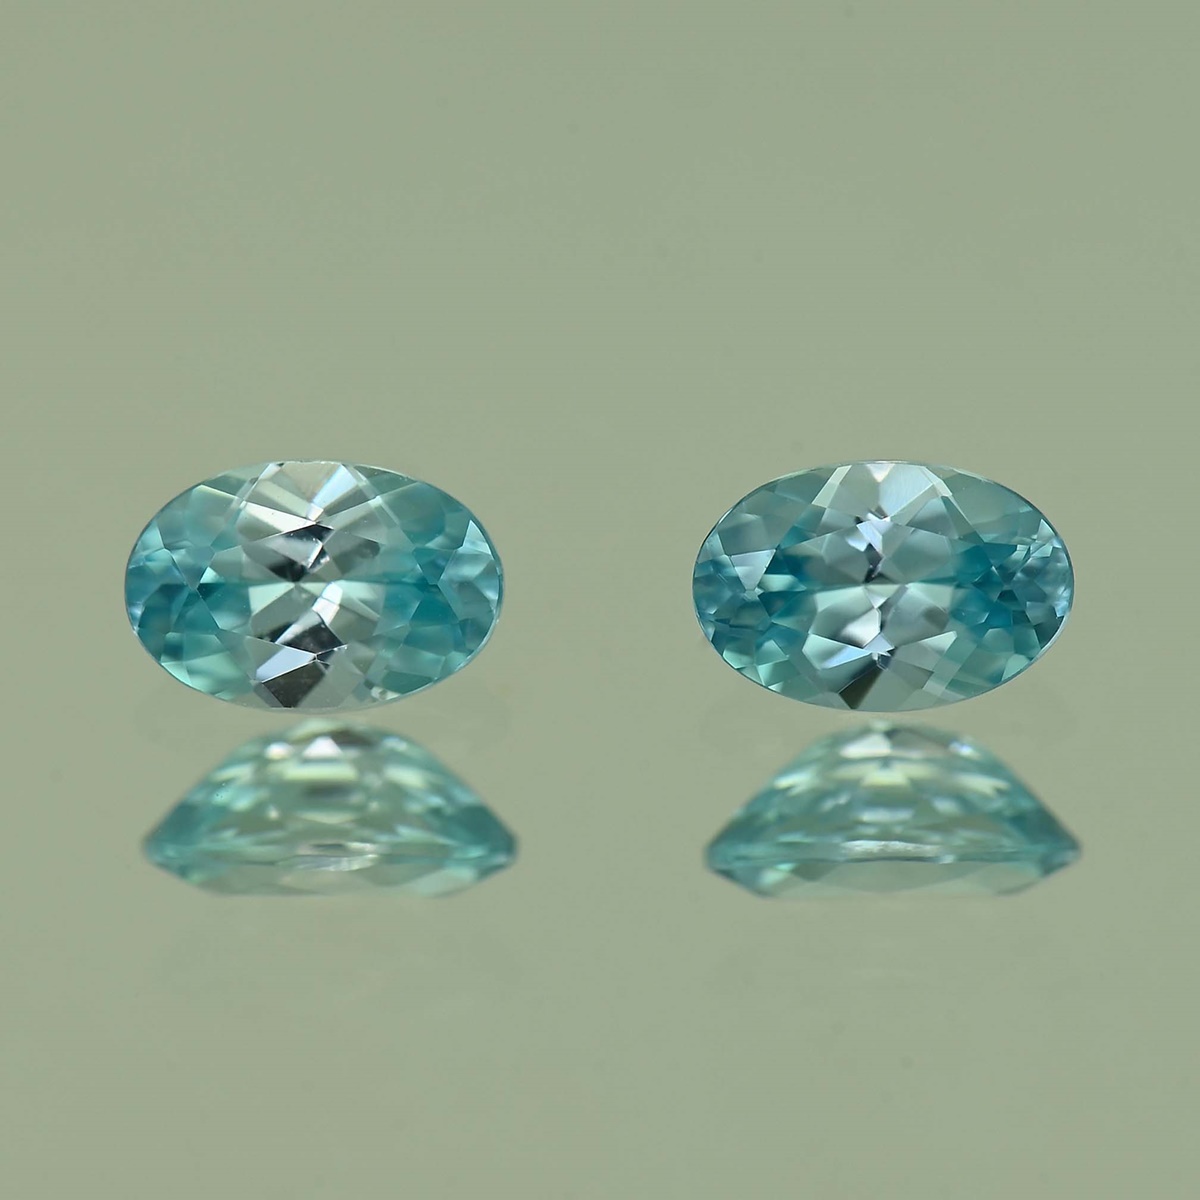 BlueZircon_oval_pair_6.0x4.0mm_1.35cts_H_zn2193